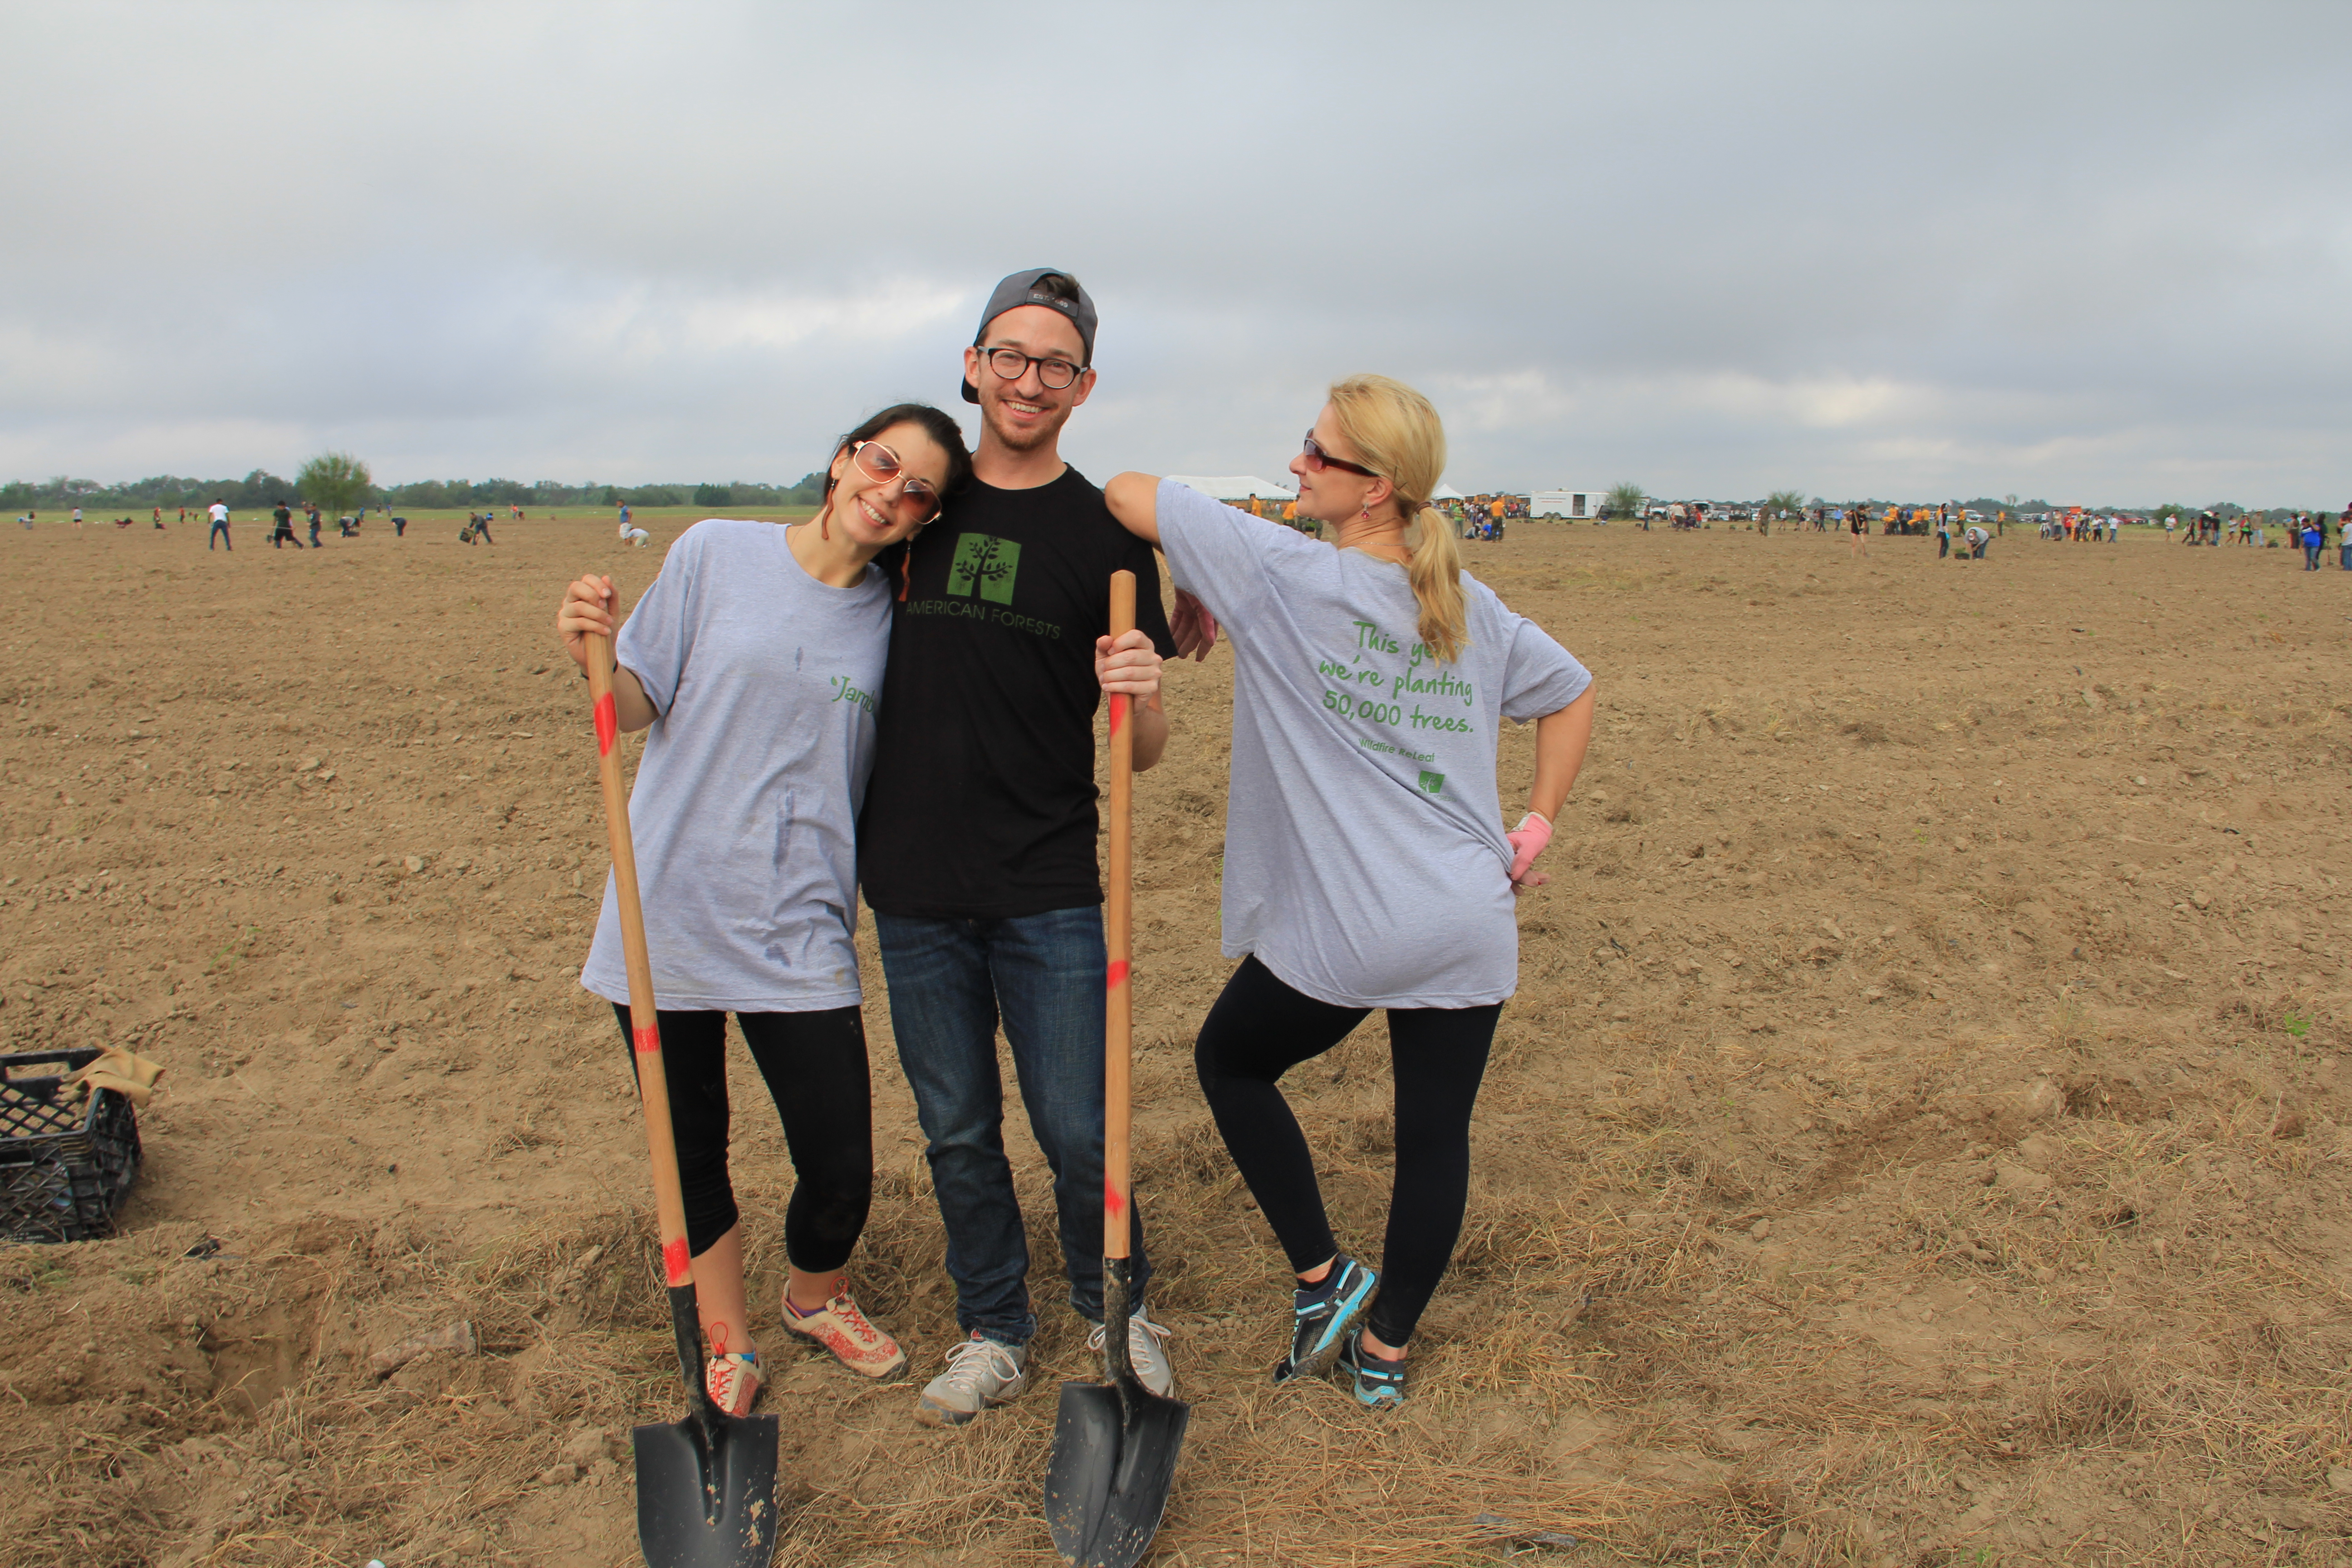 American Forests staff and Volunteers standing in empty field with shovels